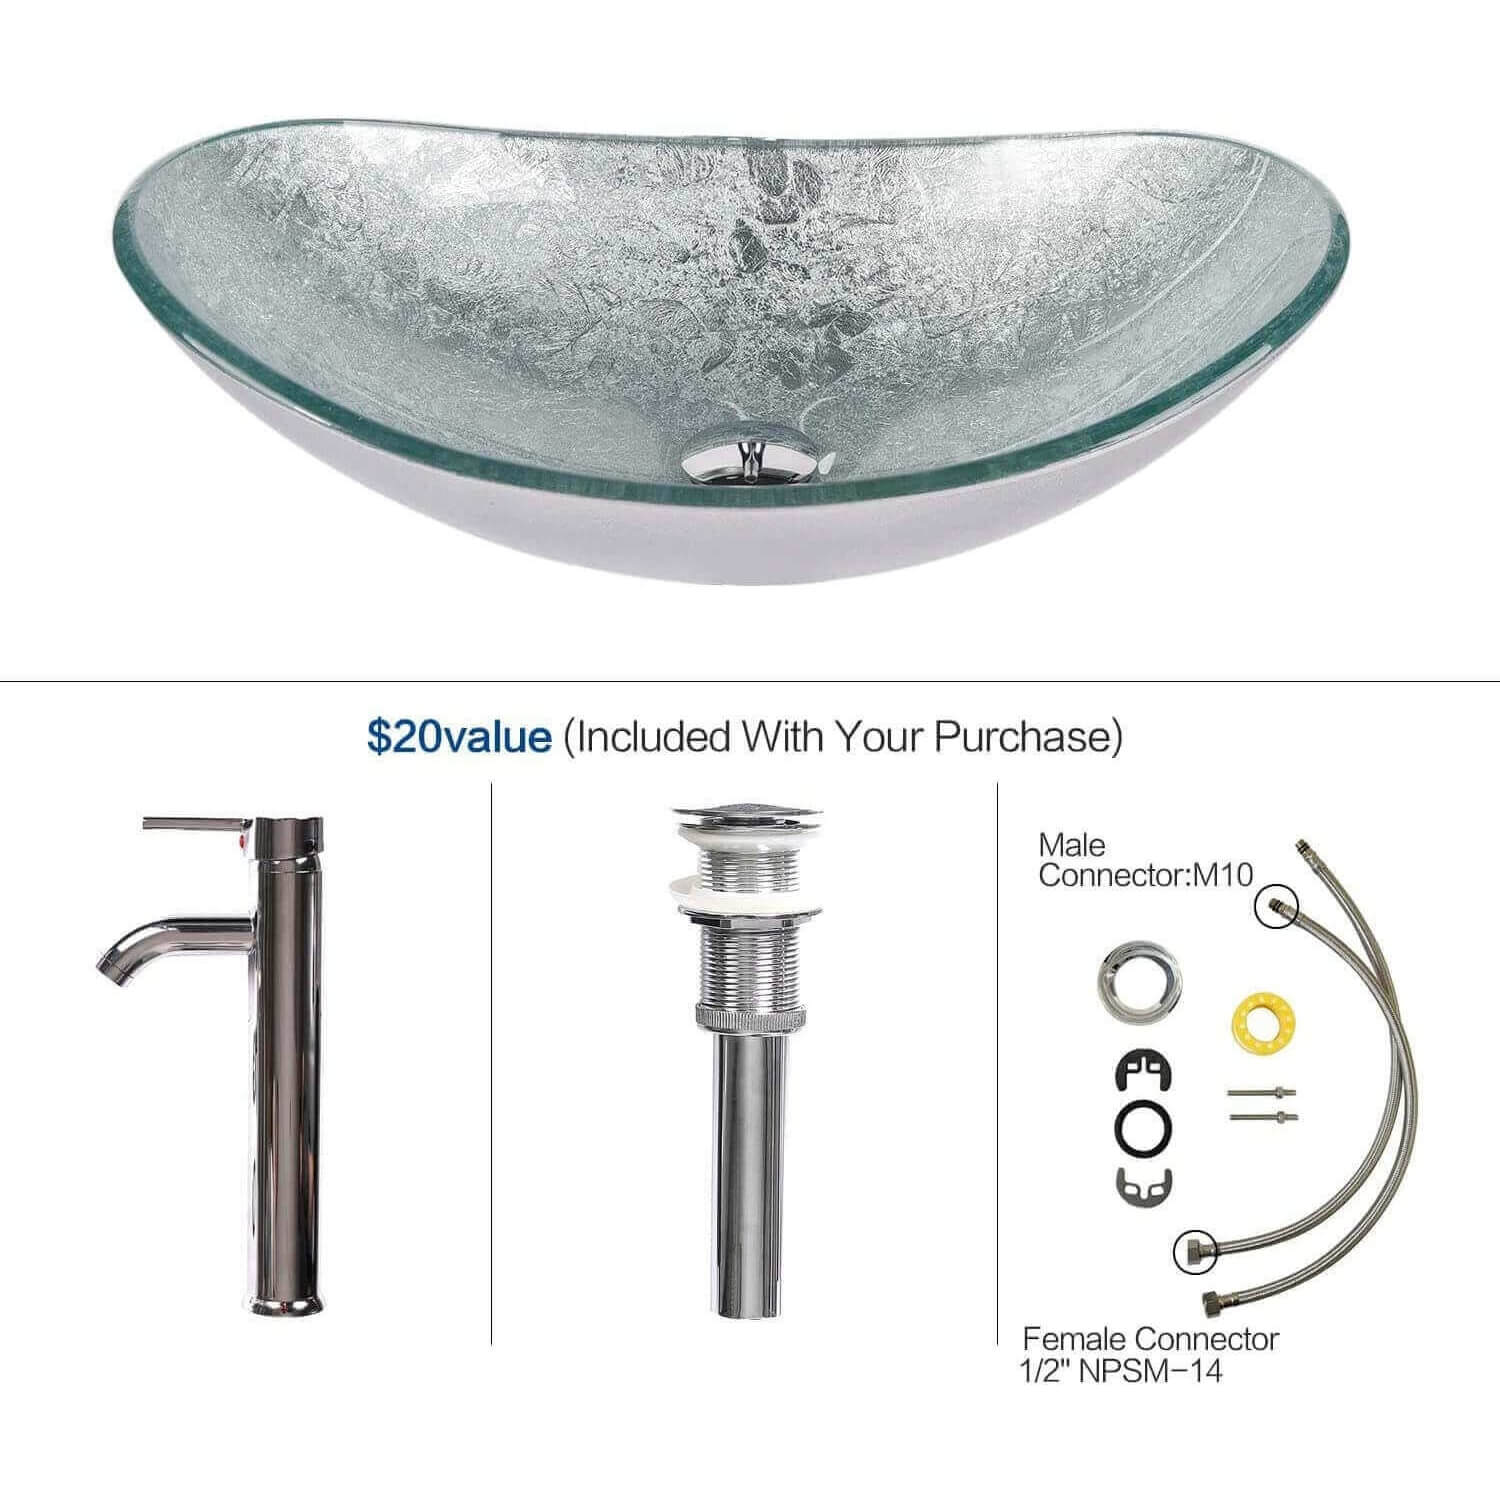 Elecwish silver boat glass sink with component